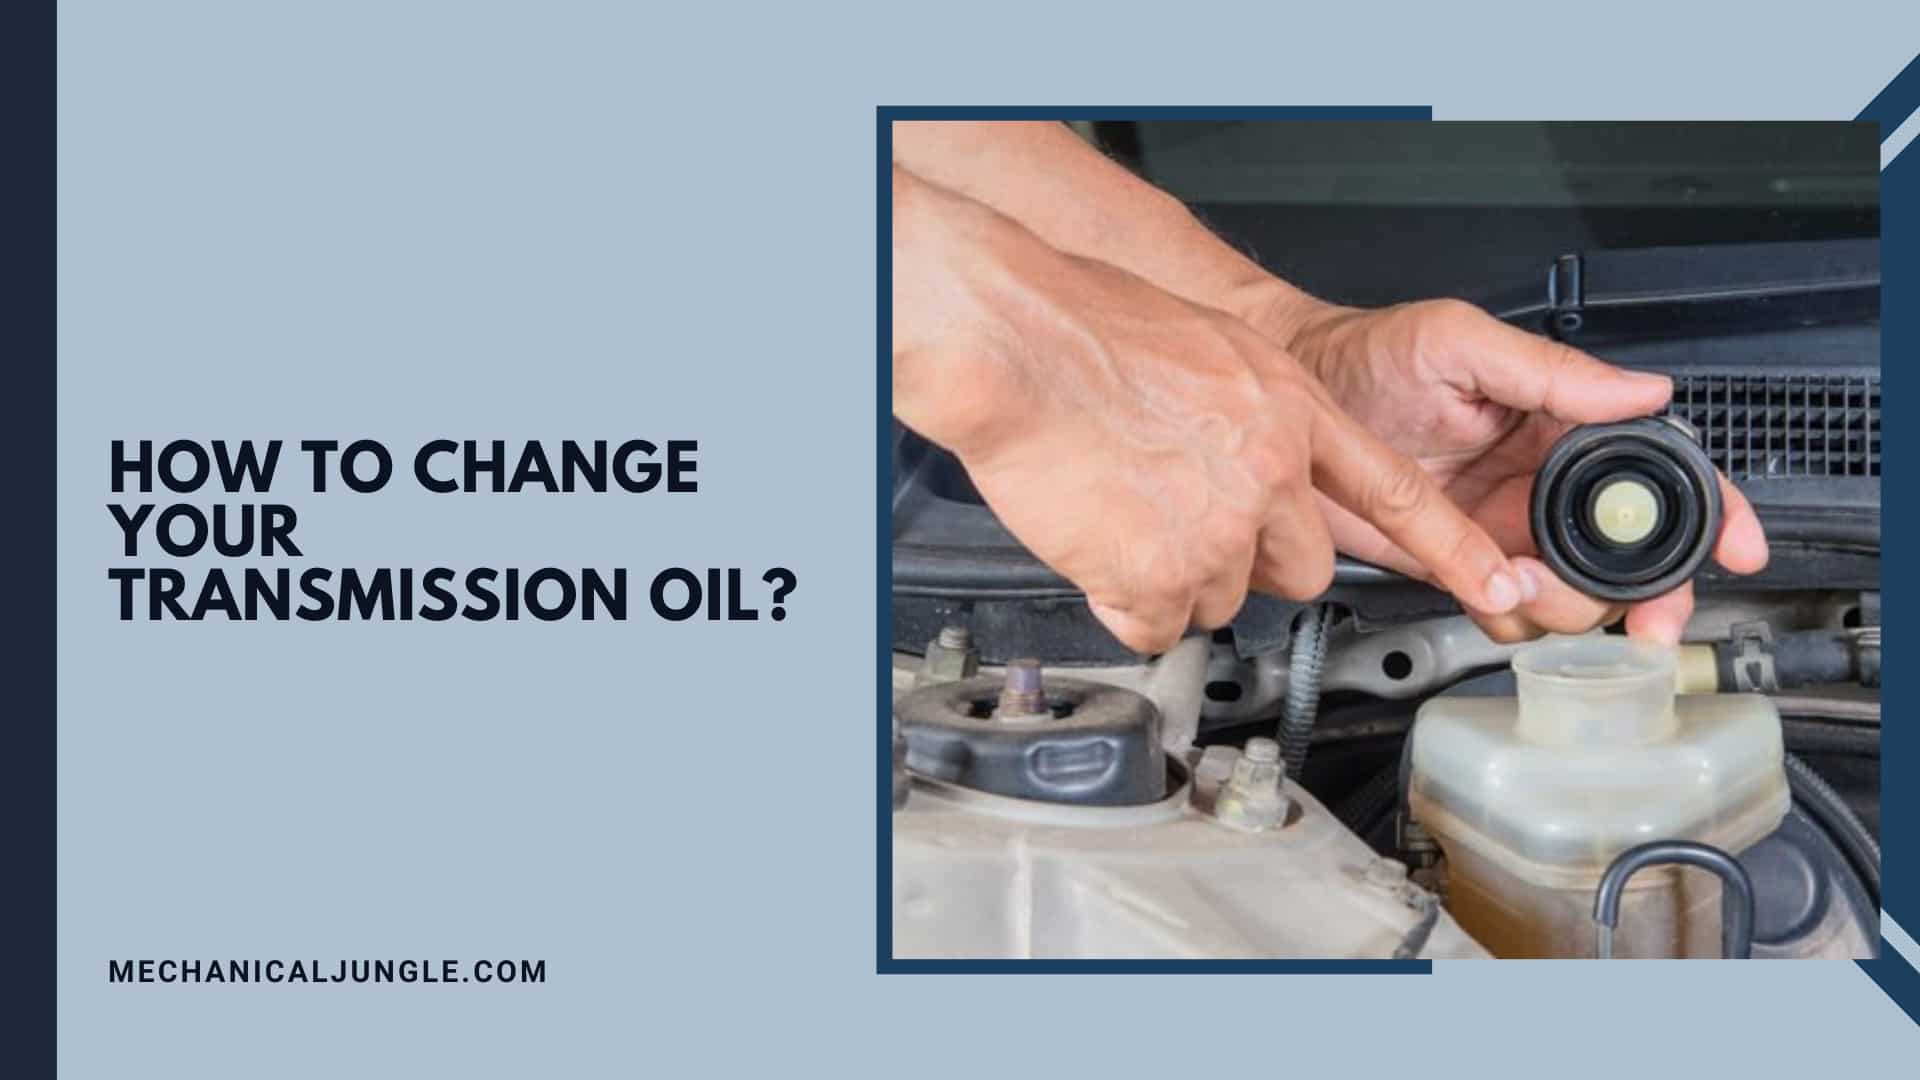 How to Change Your Transmission Oil?